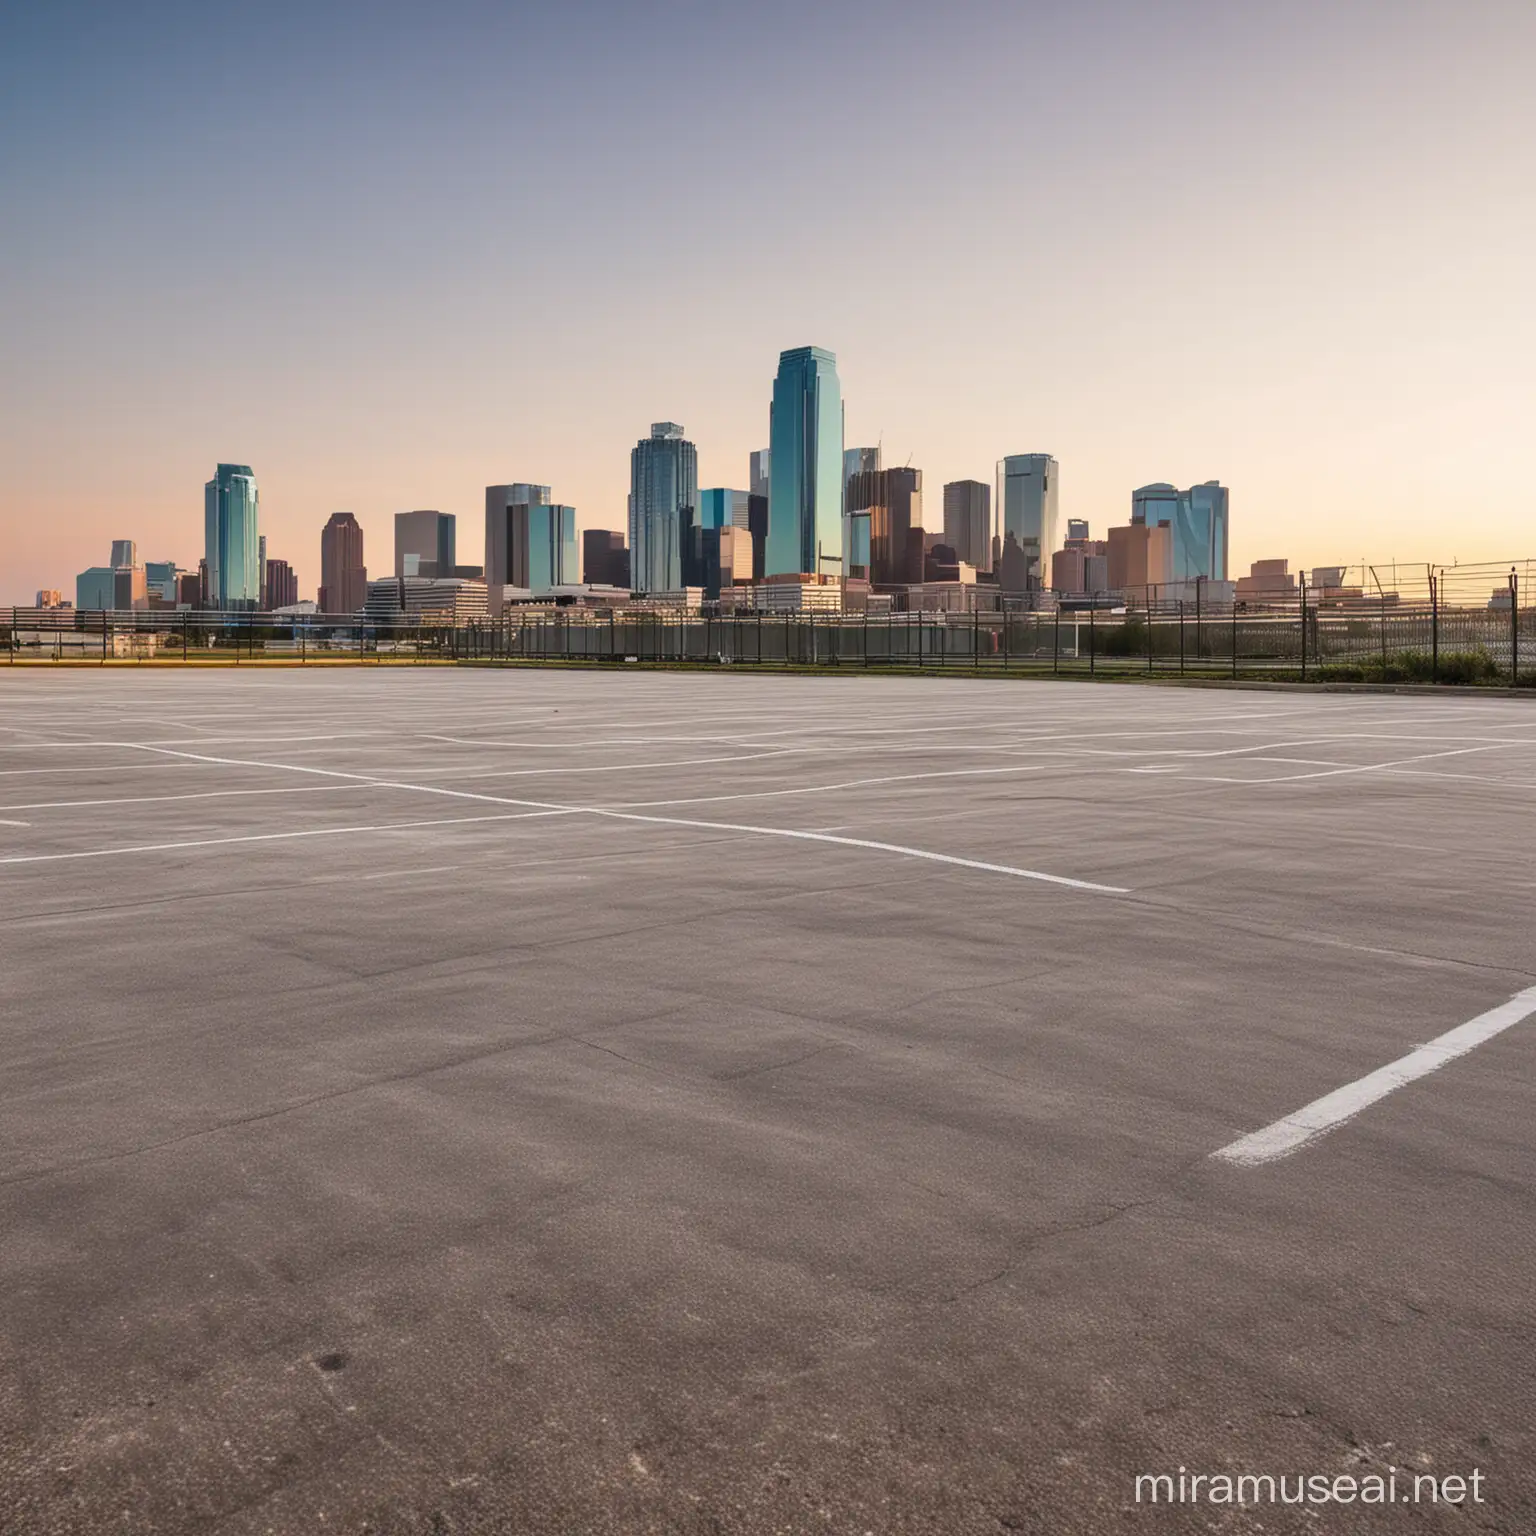 empty parking lot with Dallas Texas skyline in the background